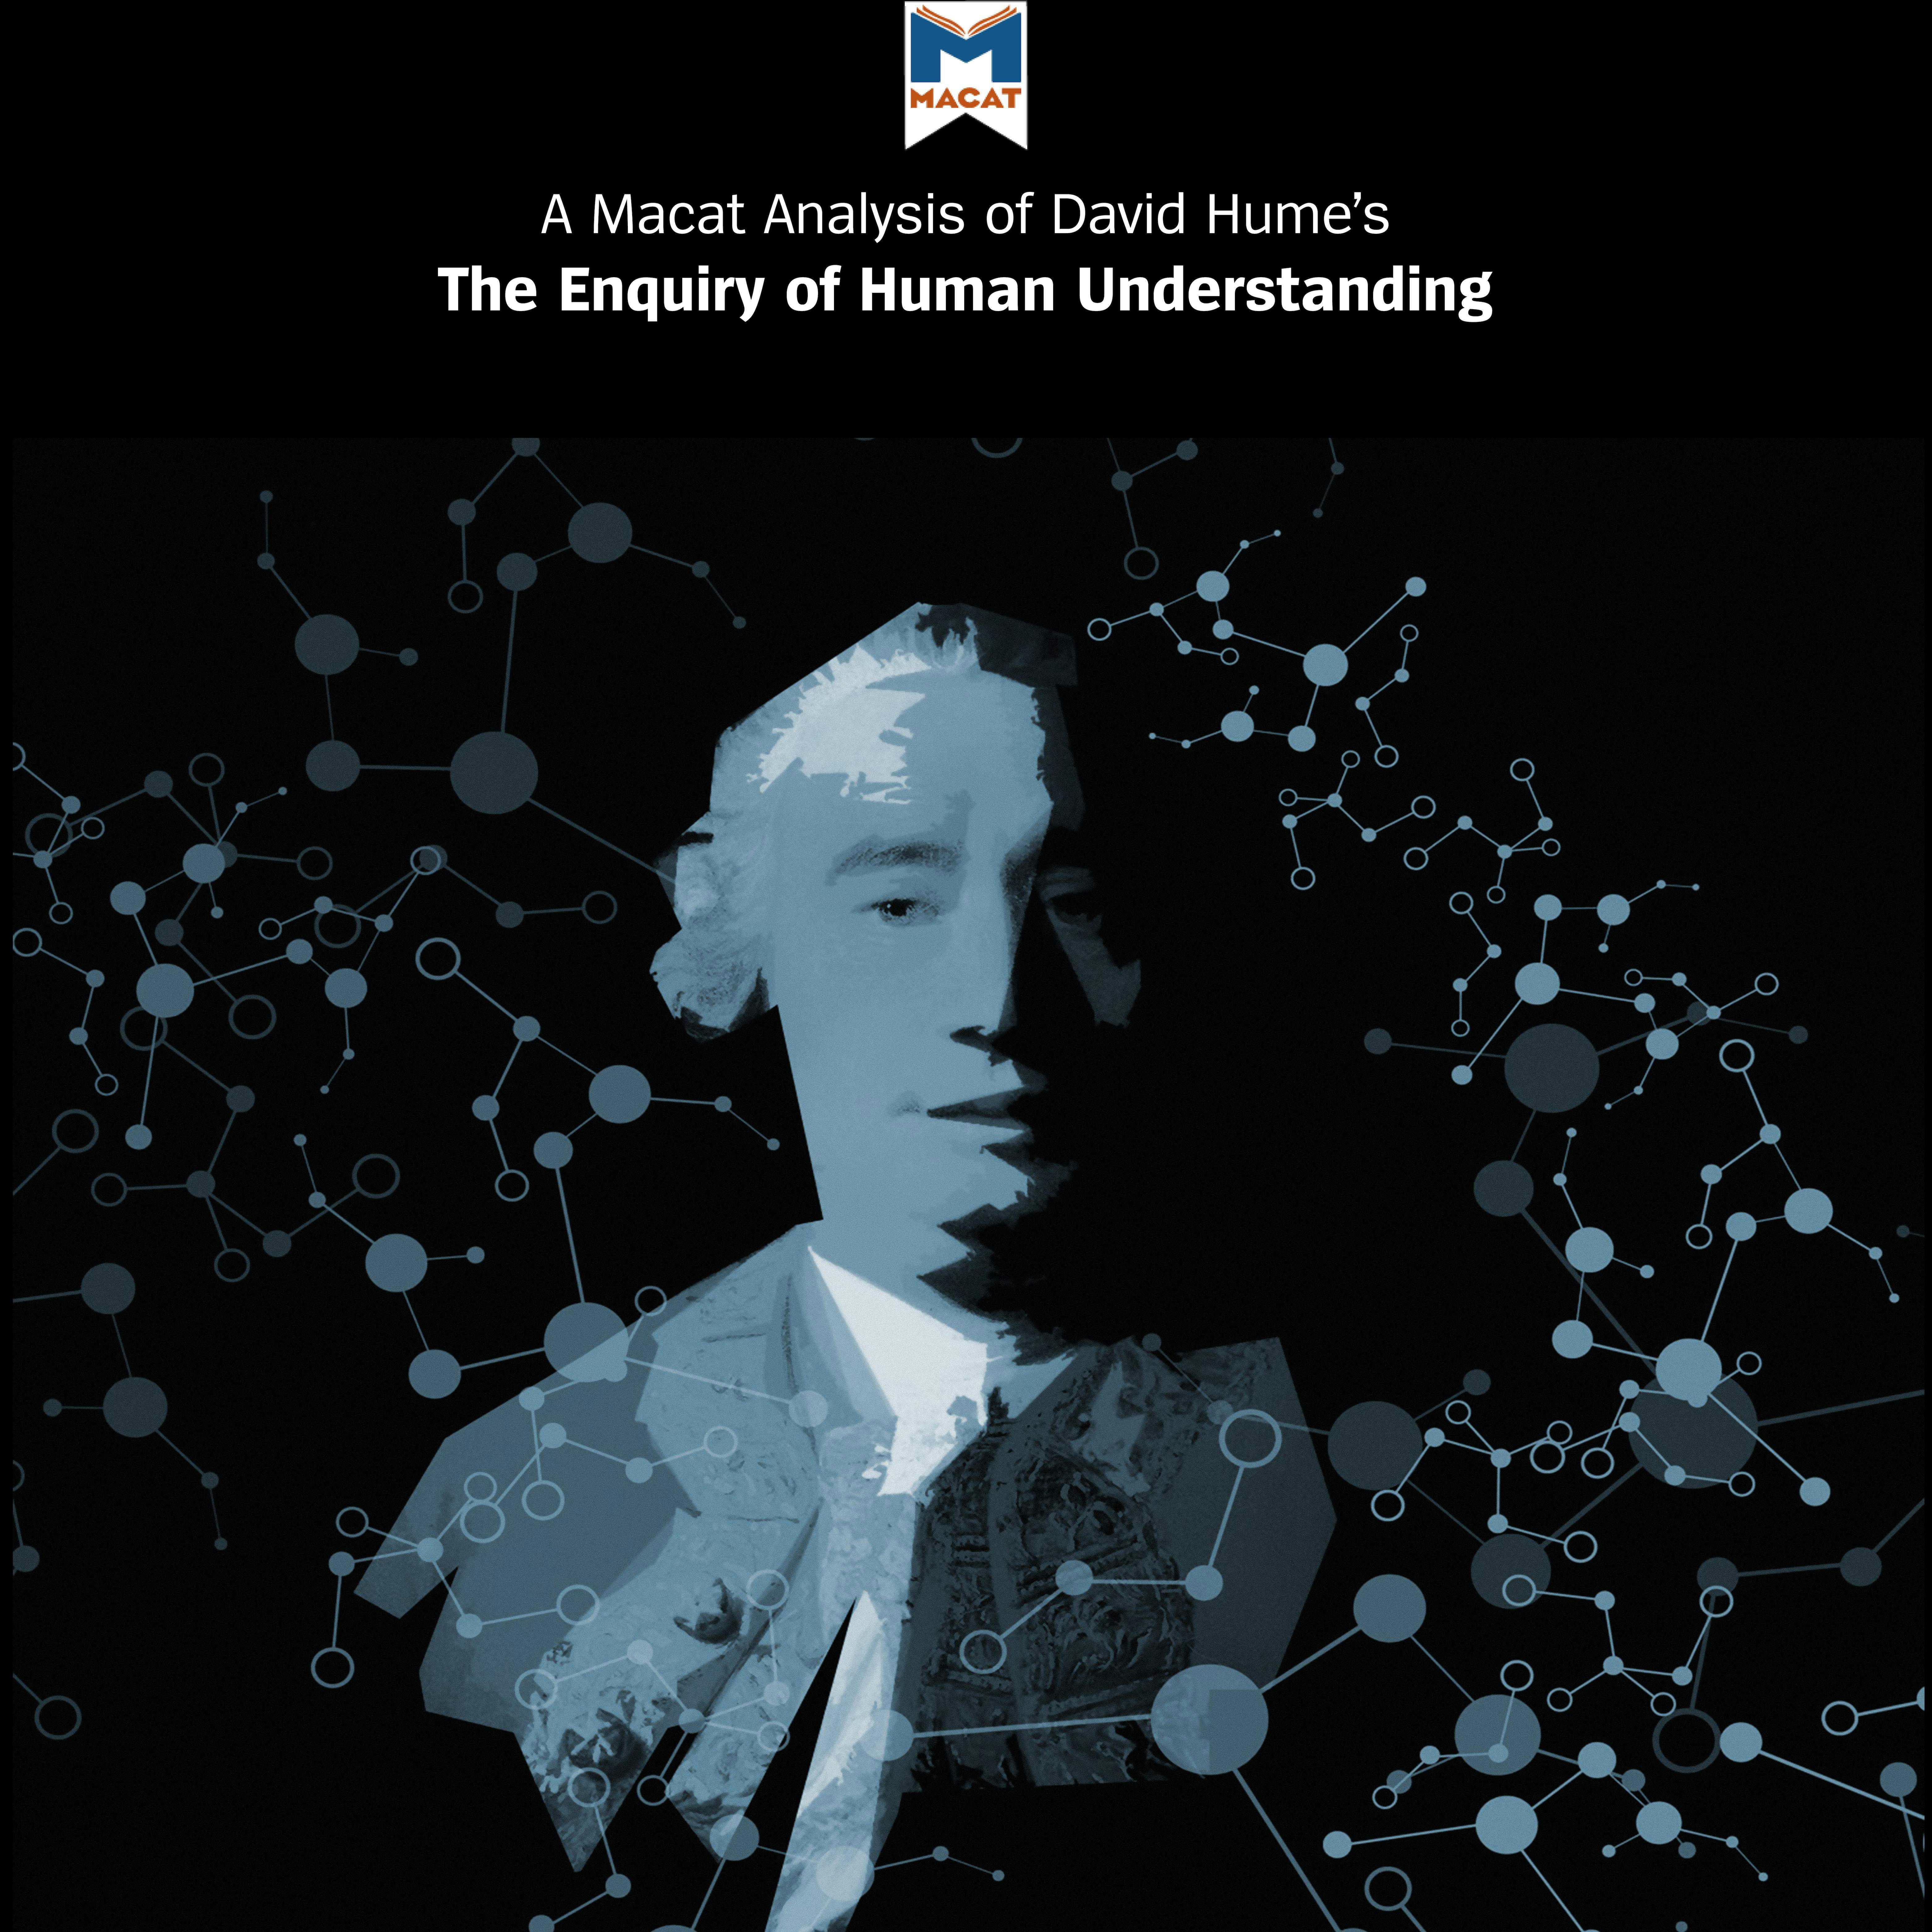 A Macat Analysis of David Hume's An Enquiry Concerning Human Understanding - undefined